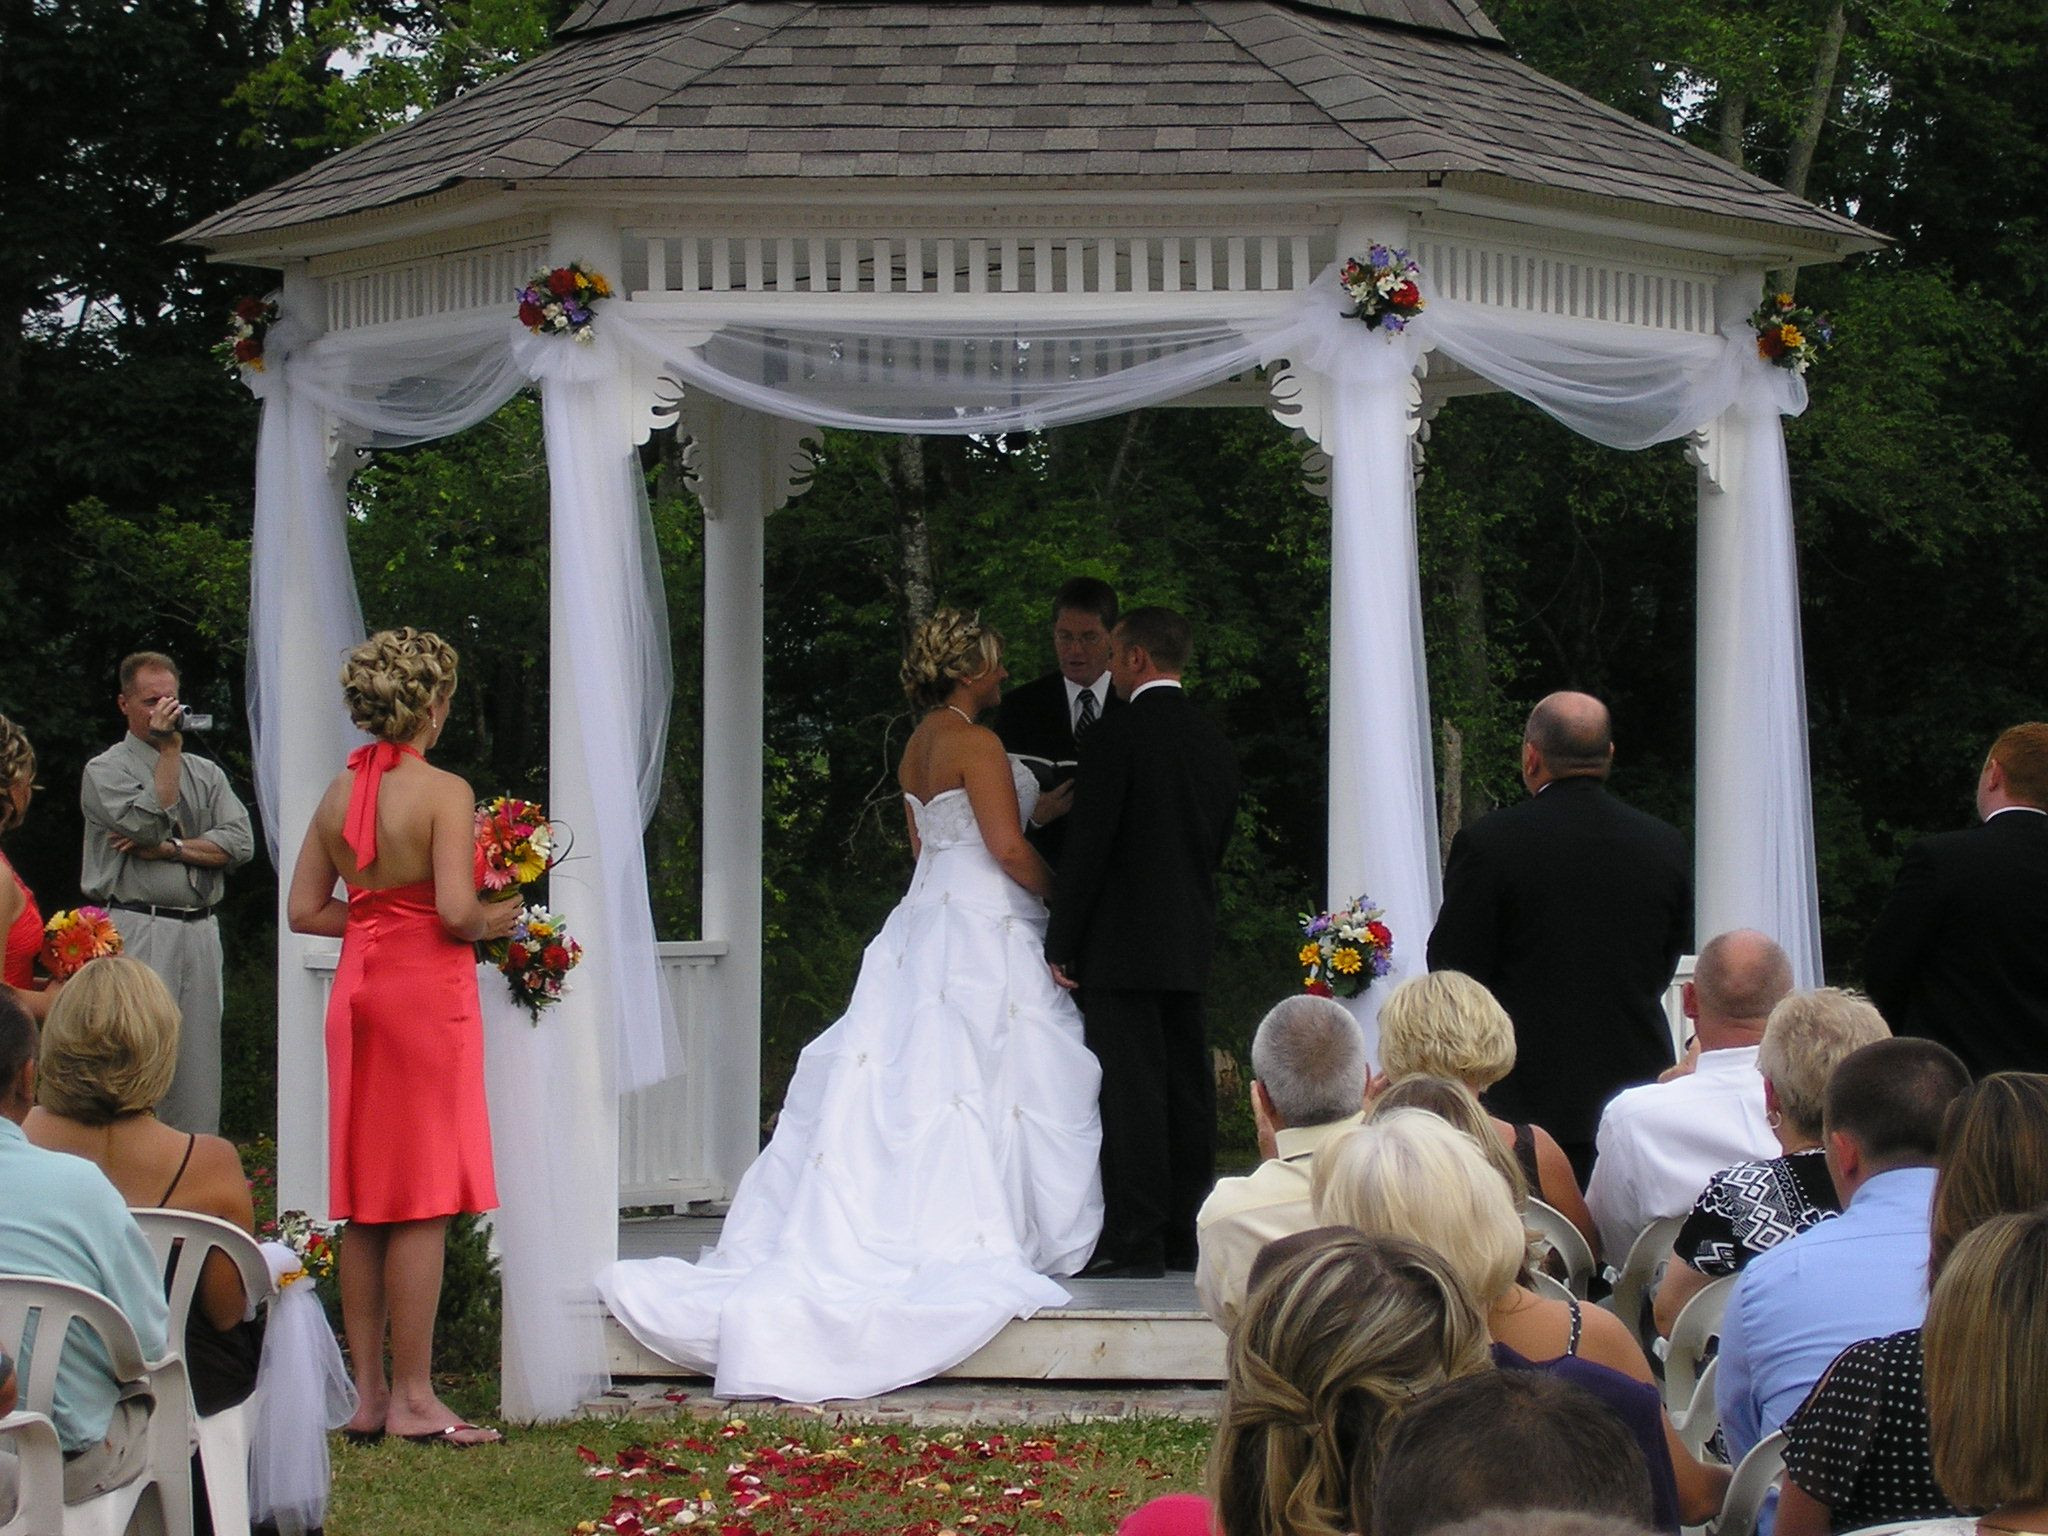 How To Decorate A Gazebo For A Wedding
 Wedding Gazebo Decorations a little white tulle and